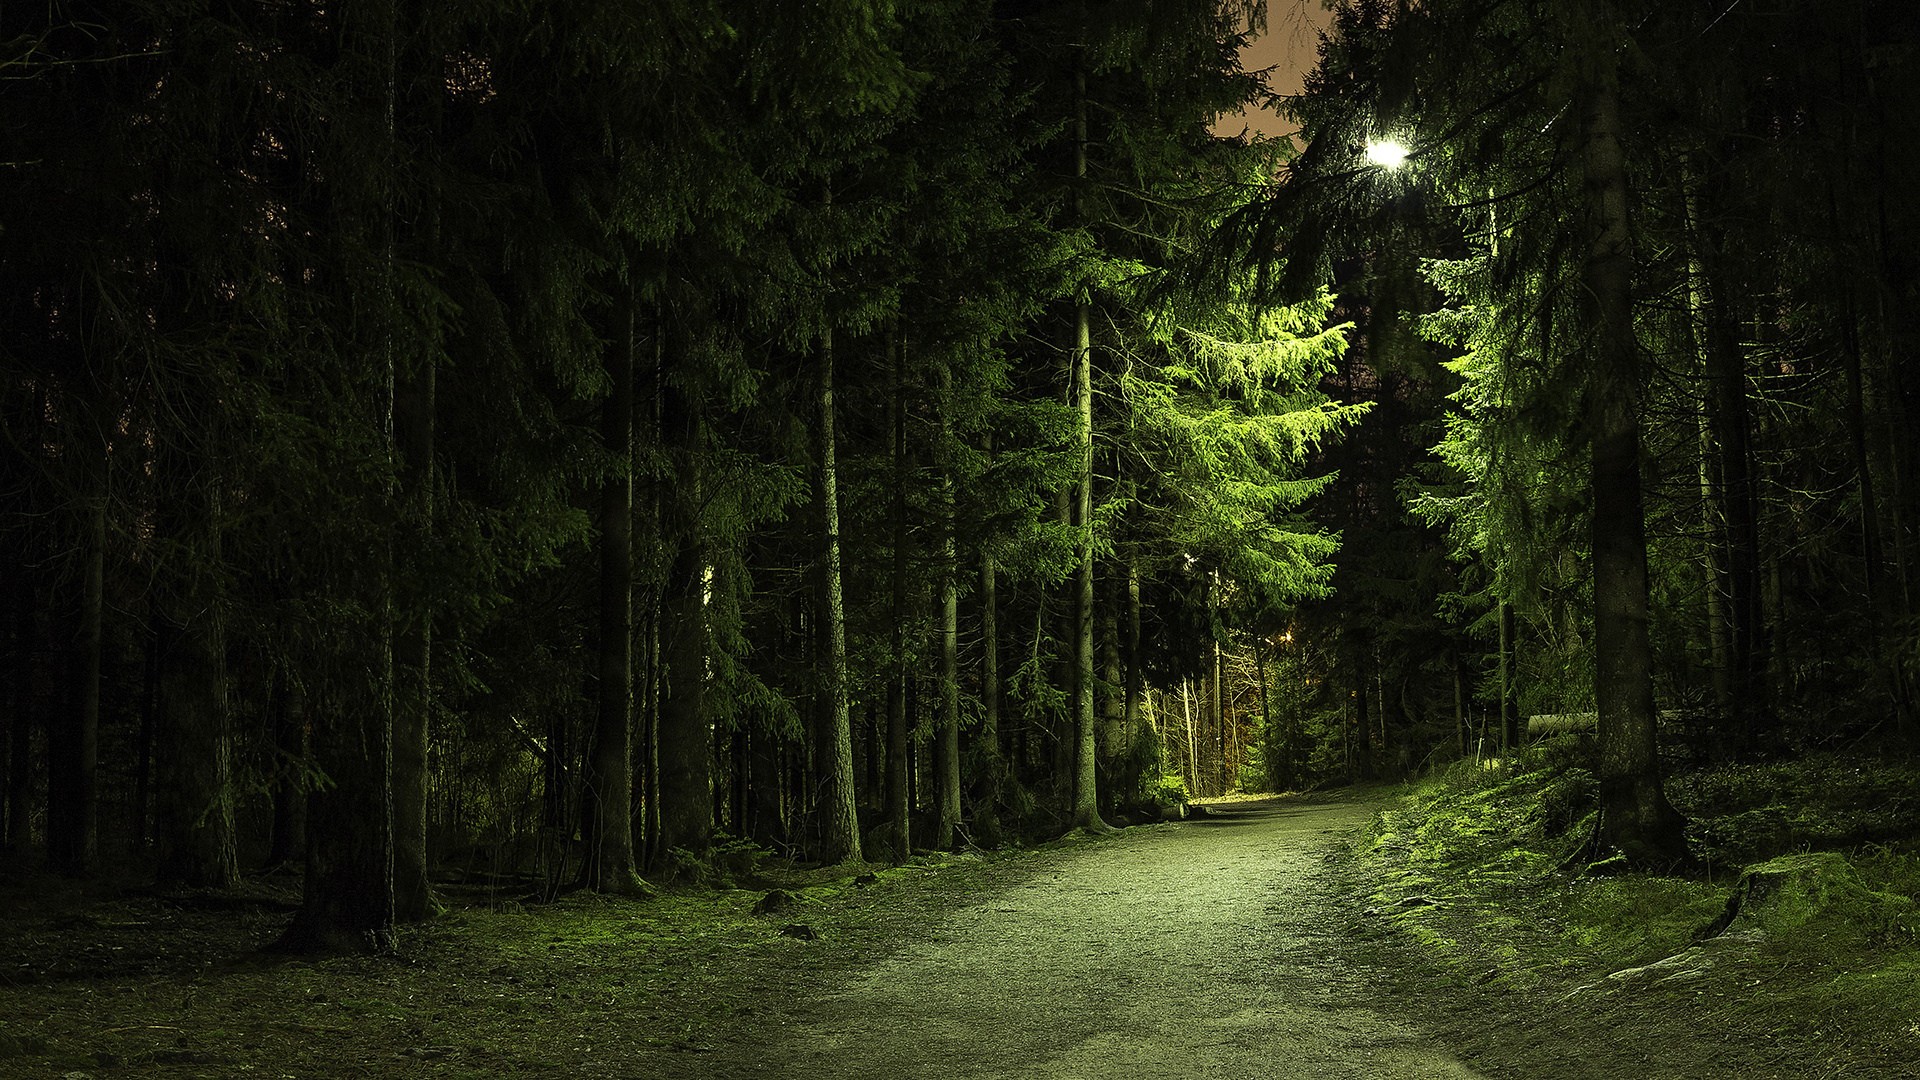 General 1920x1080 nature trees forest green branch path lights pine trees dirt road